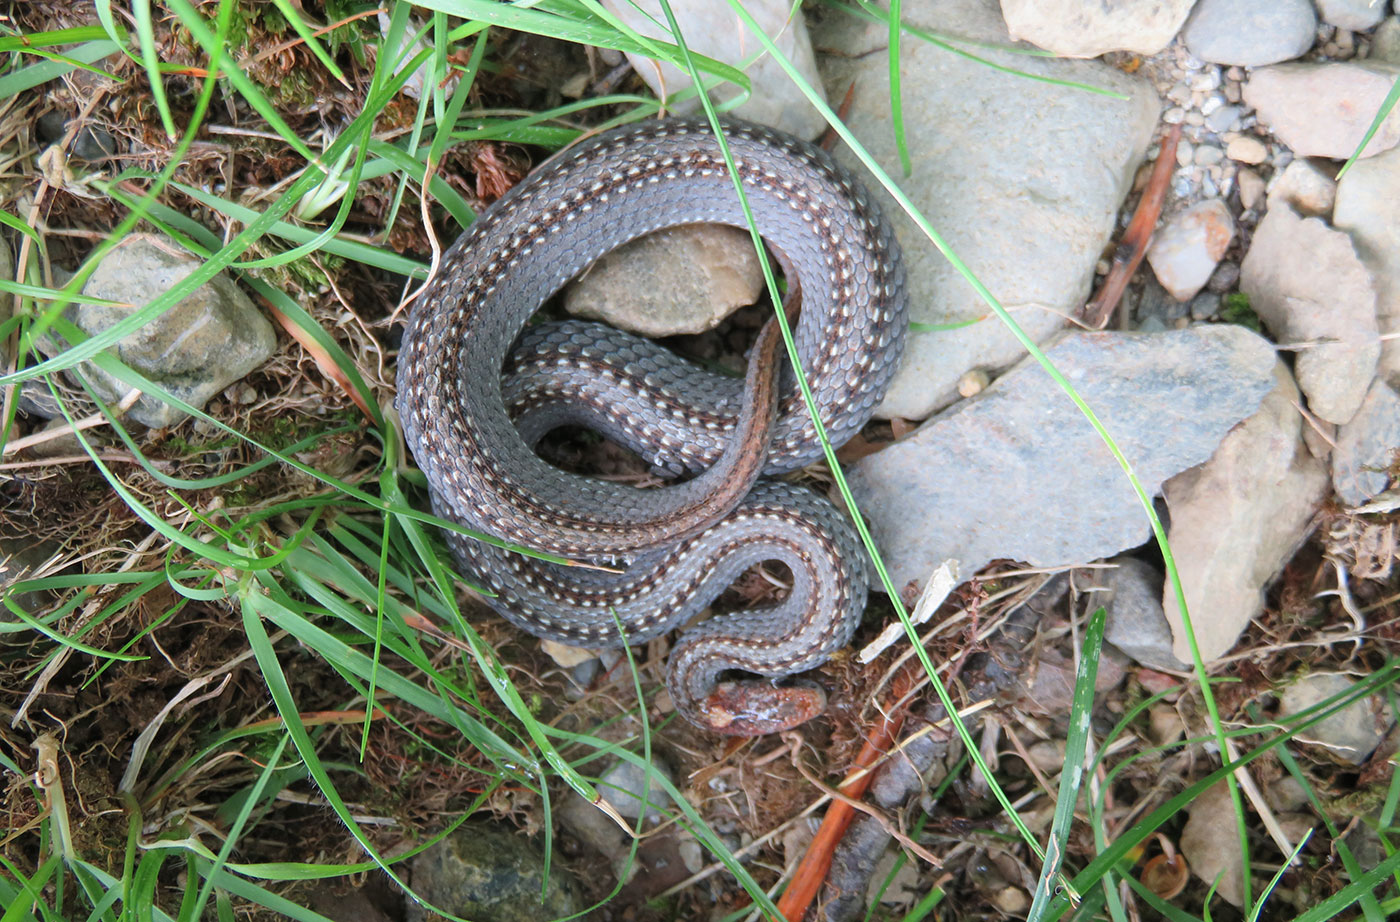 red-bellied snake